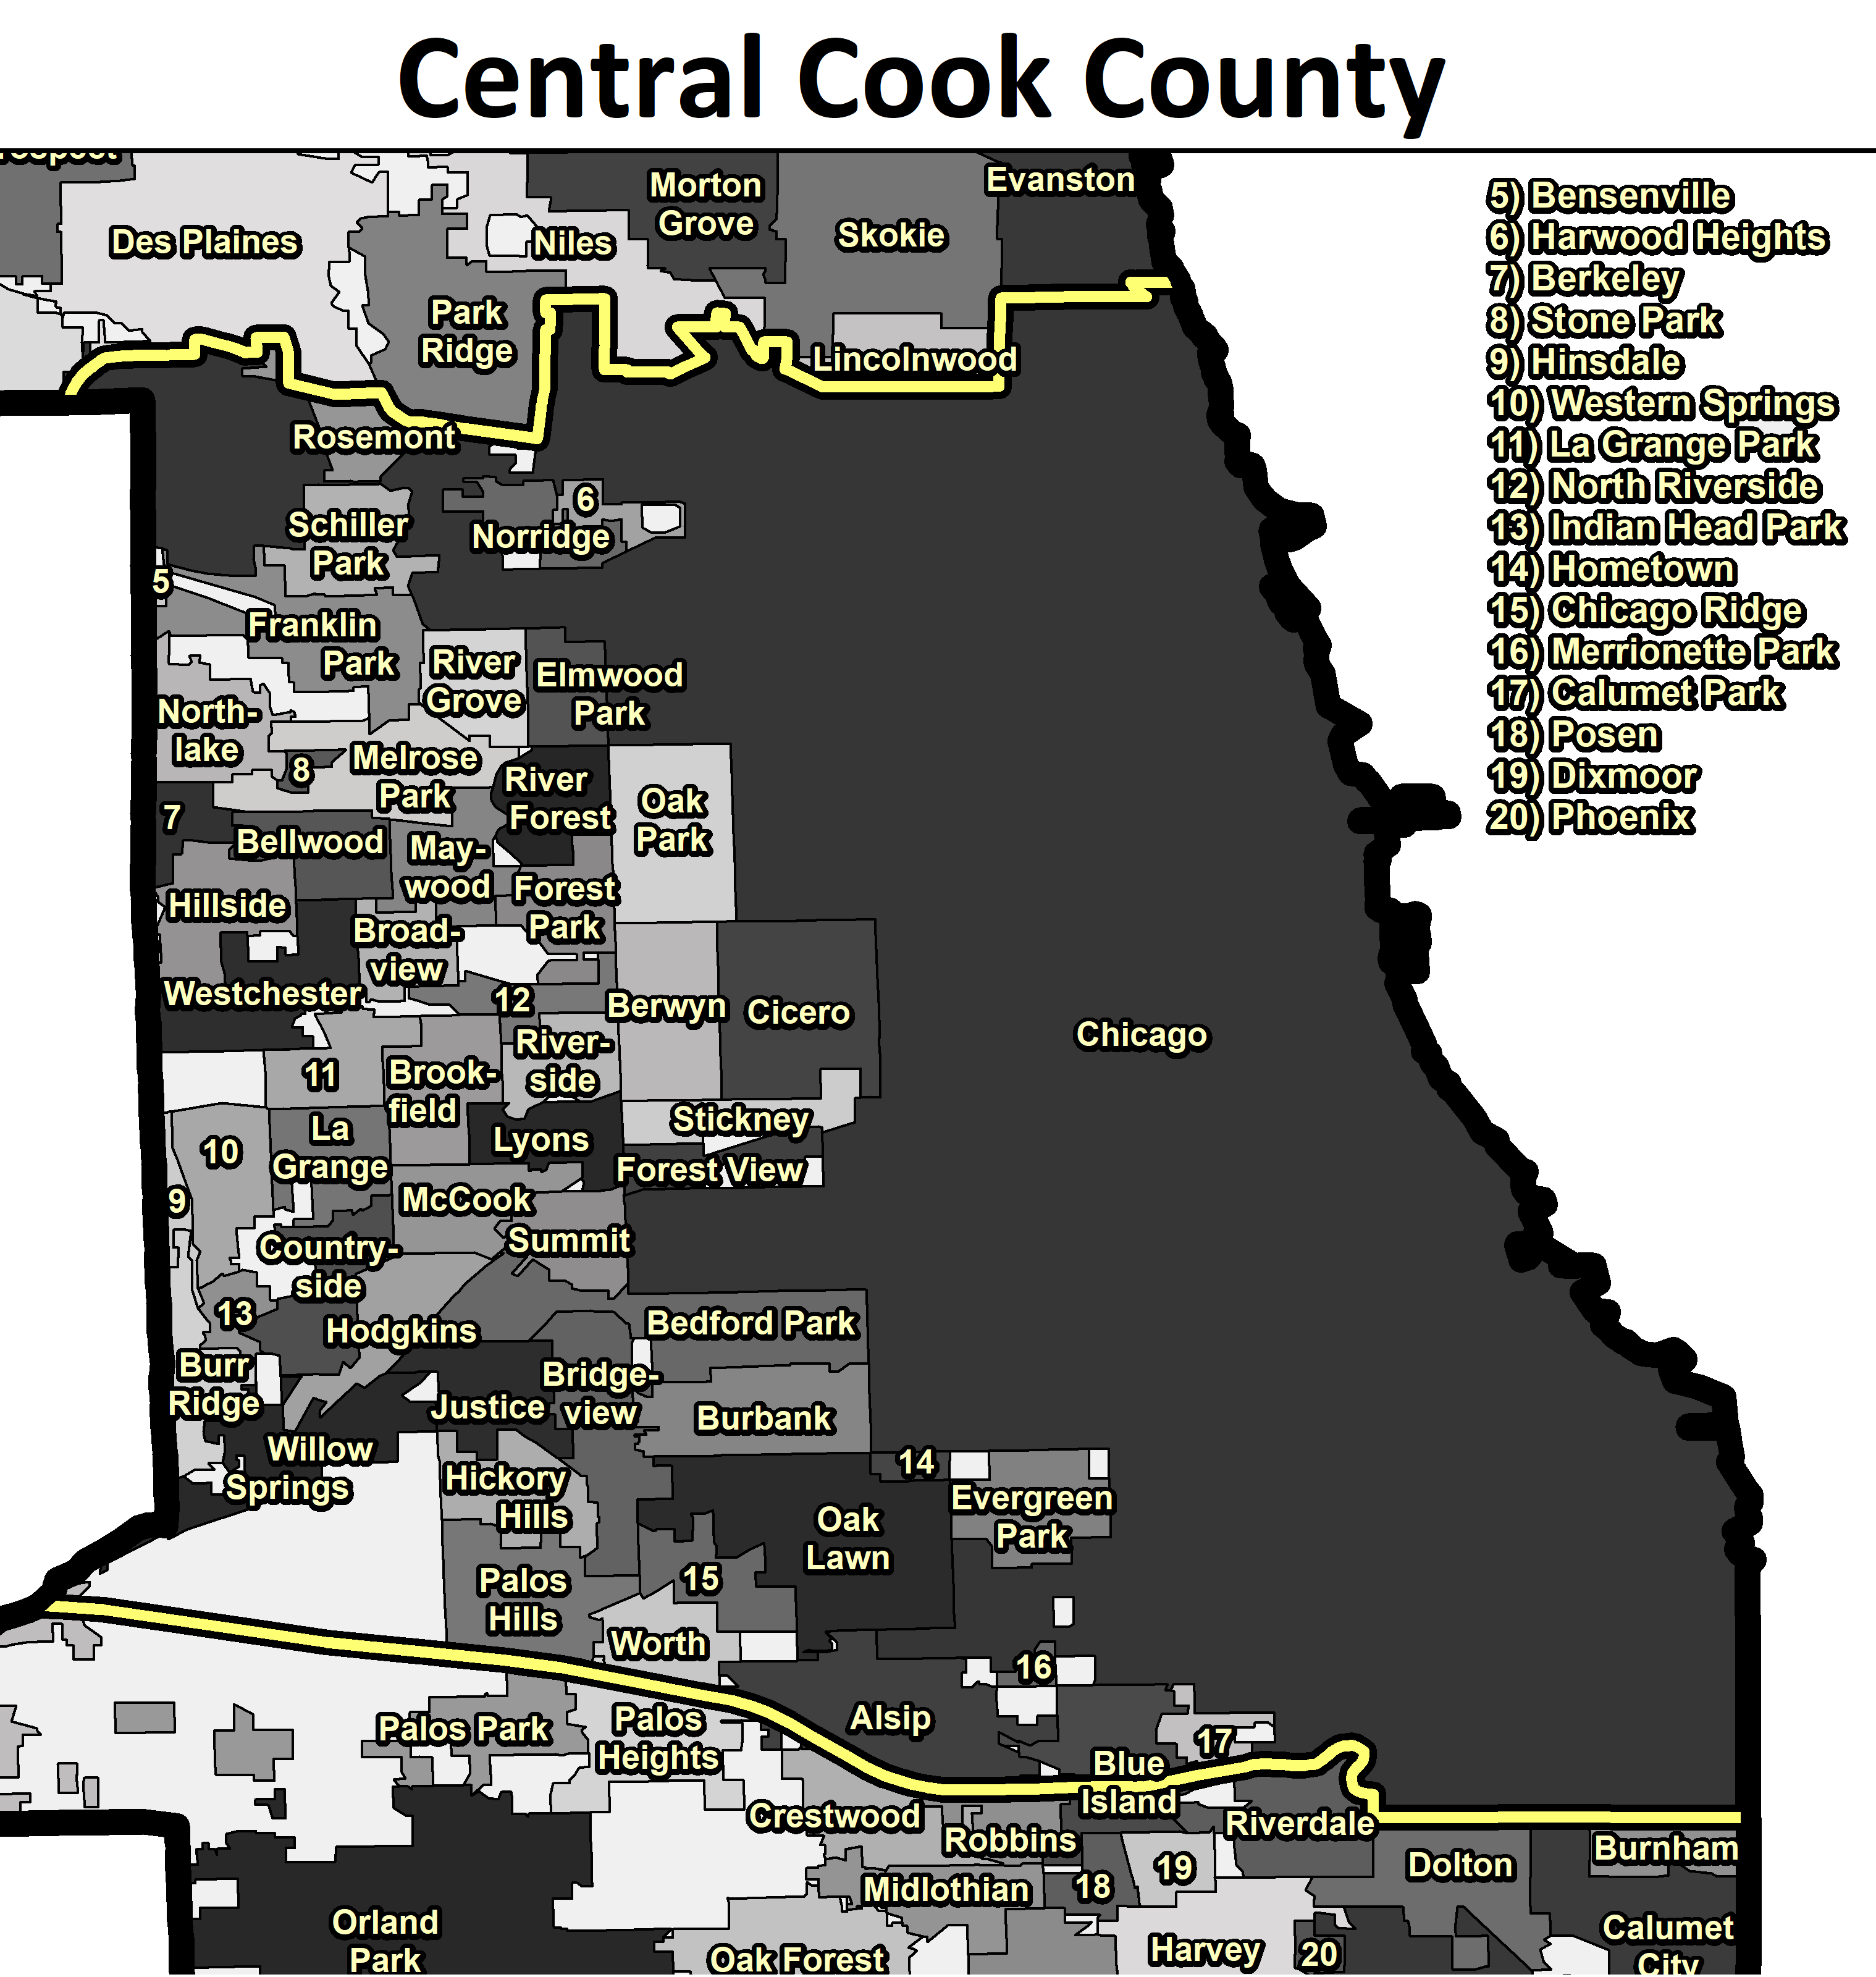 Central Cook County Forecast Zone